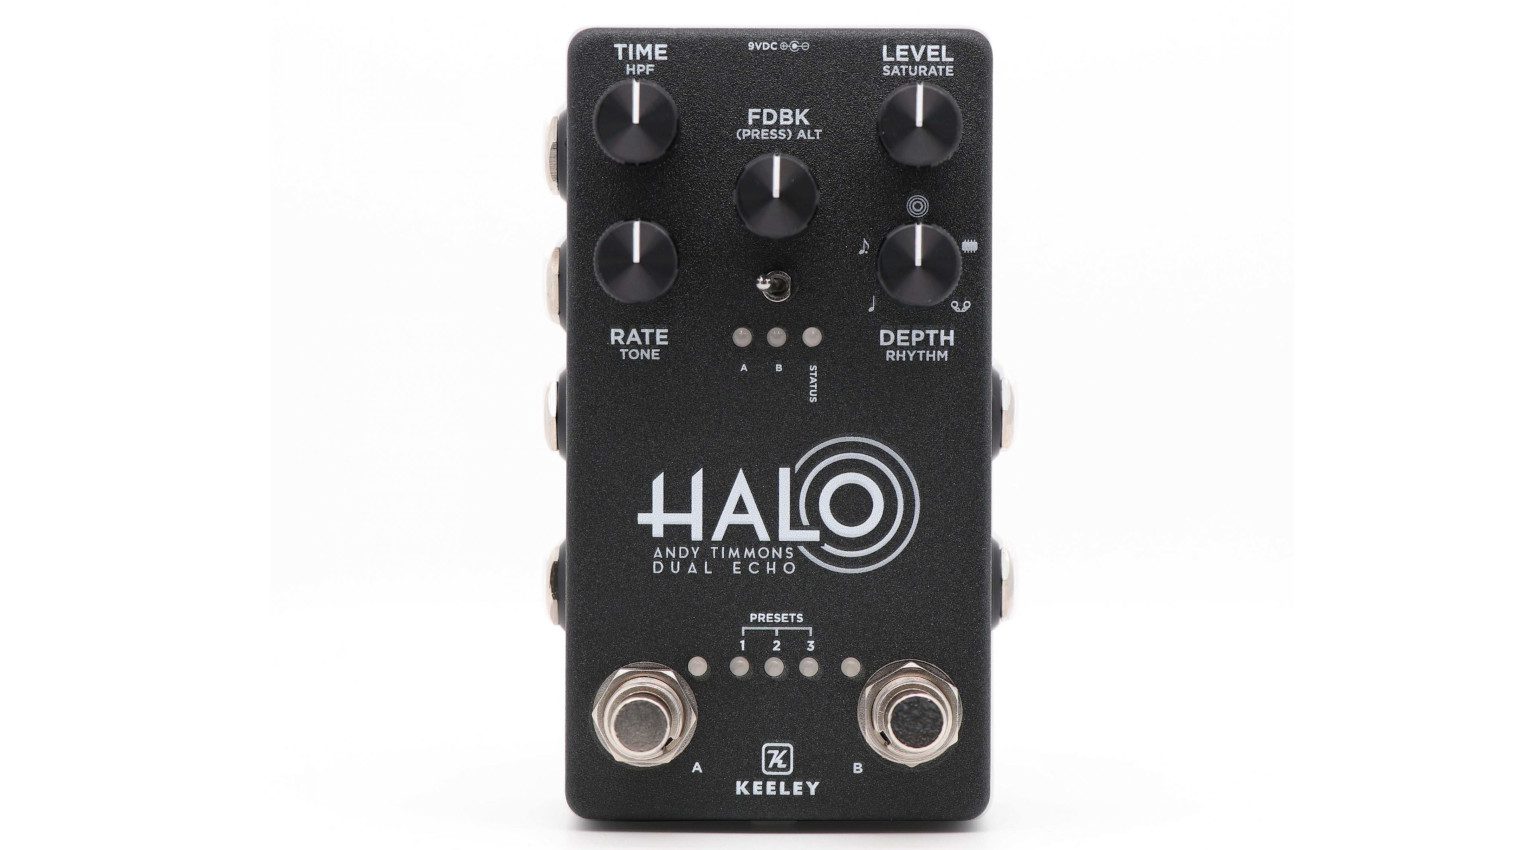 Keeley Halo Andy Timmons Delay Effekt Pedal Front